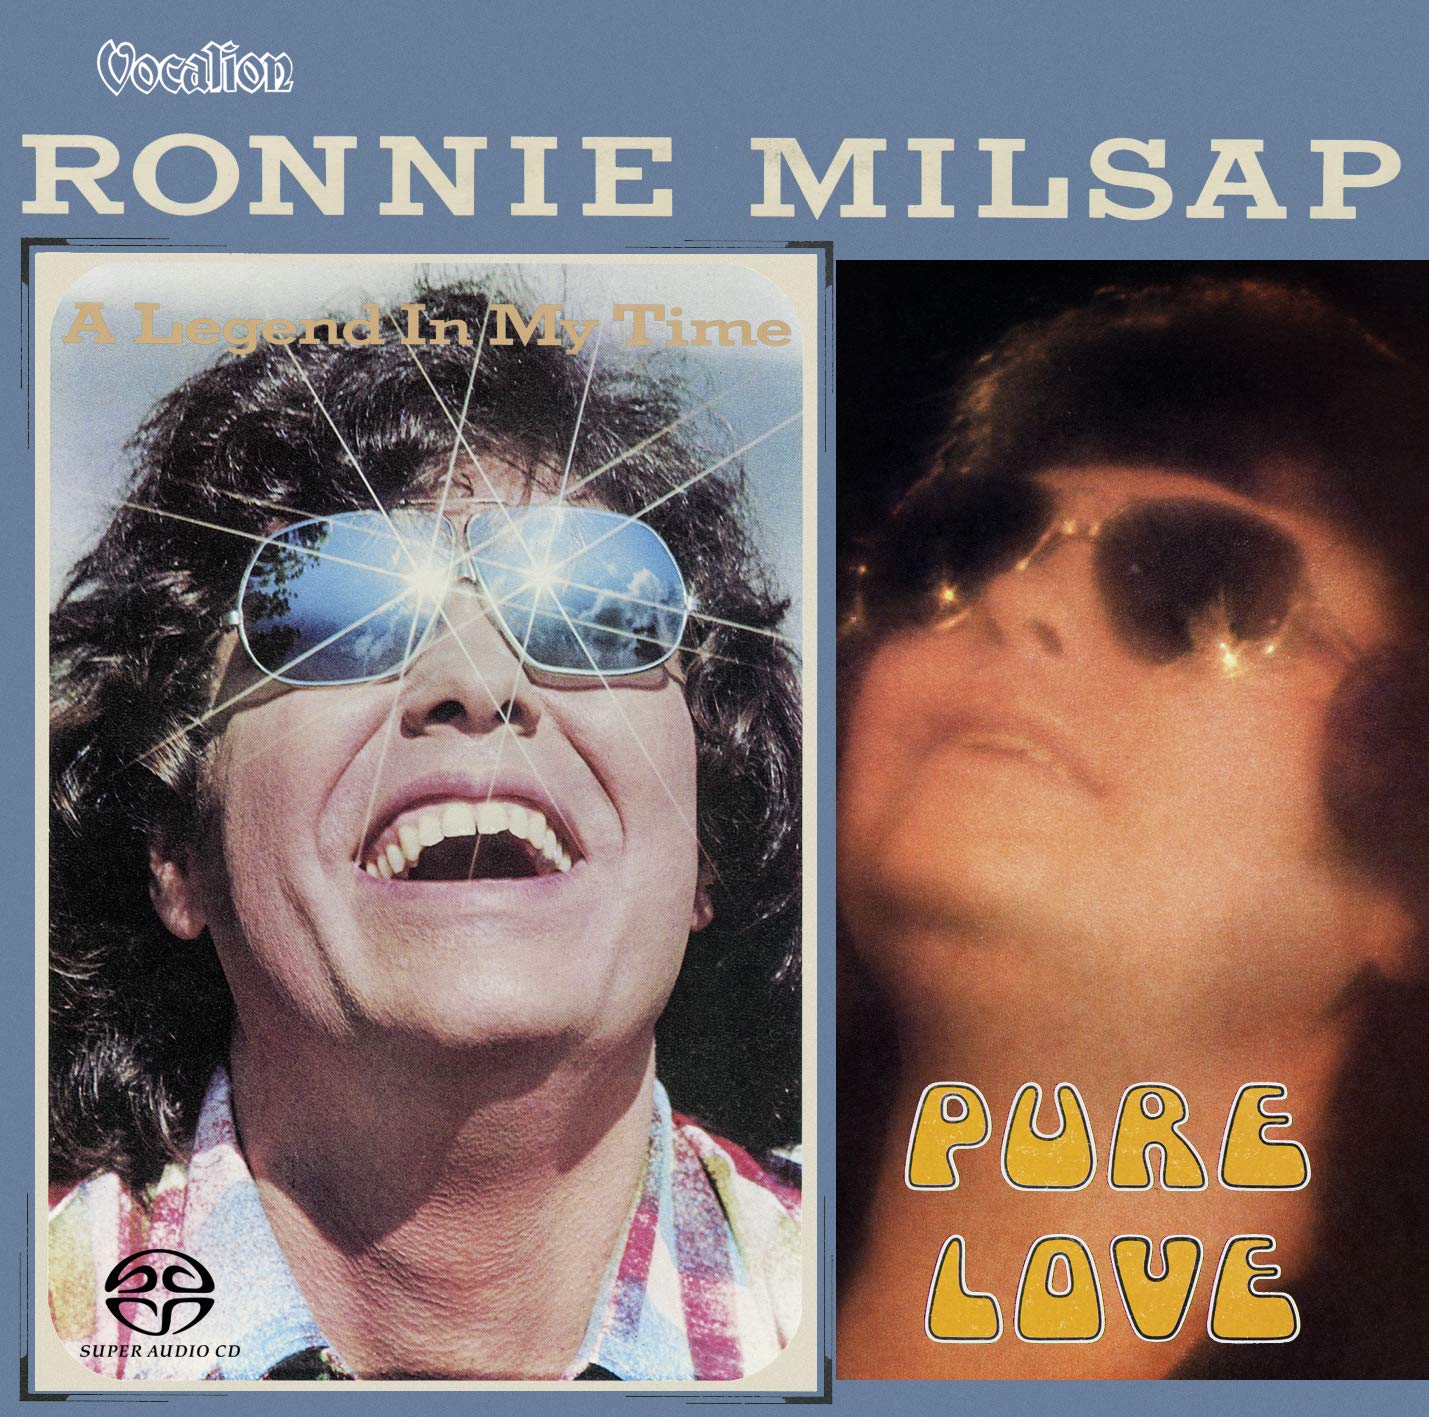 Ronnie Milsap – Pure Love & Legend In My Time (1974 & 1975) [Reissue 2019] MCH SACD ISO + DSF DSD64 + Hi-Res FLAC